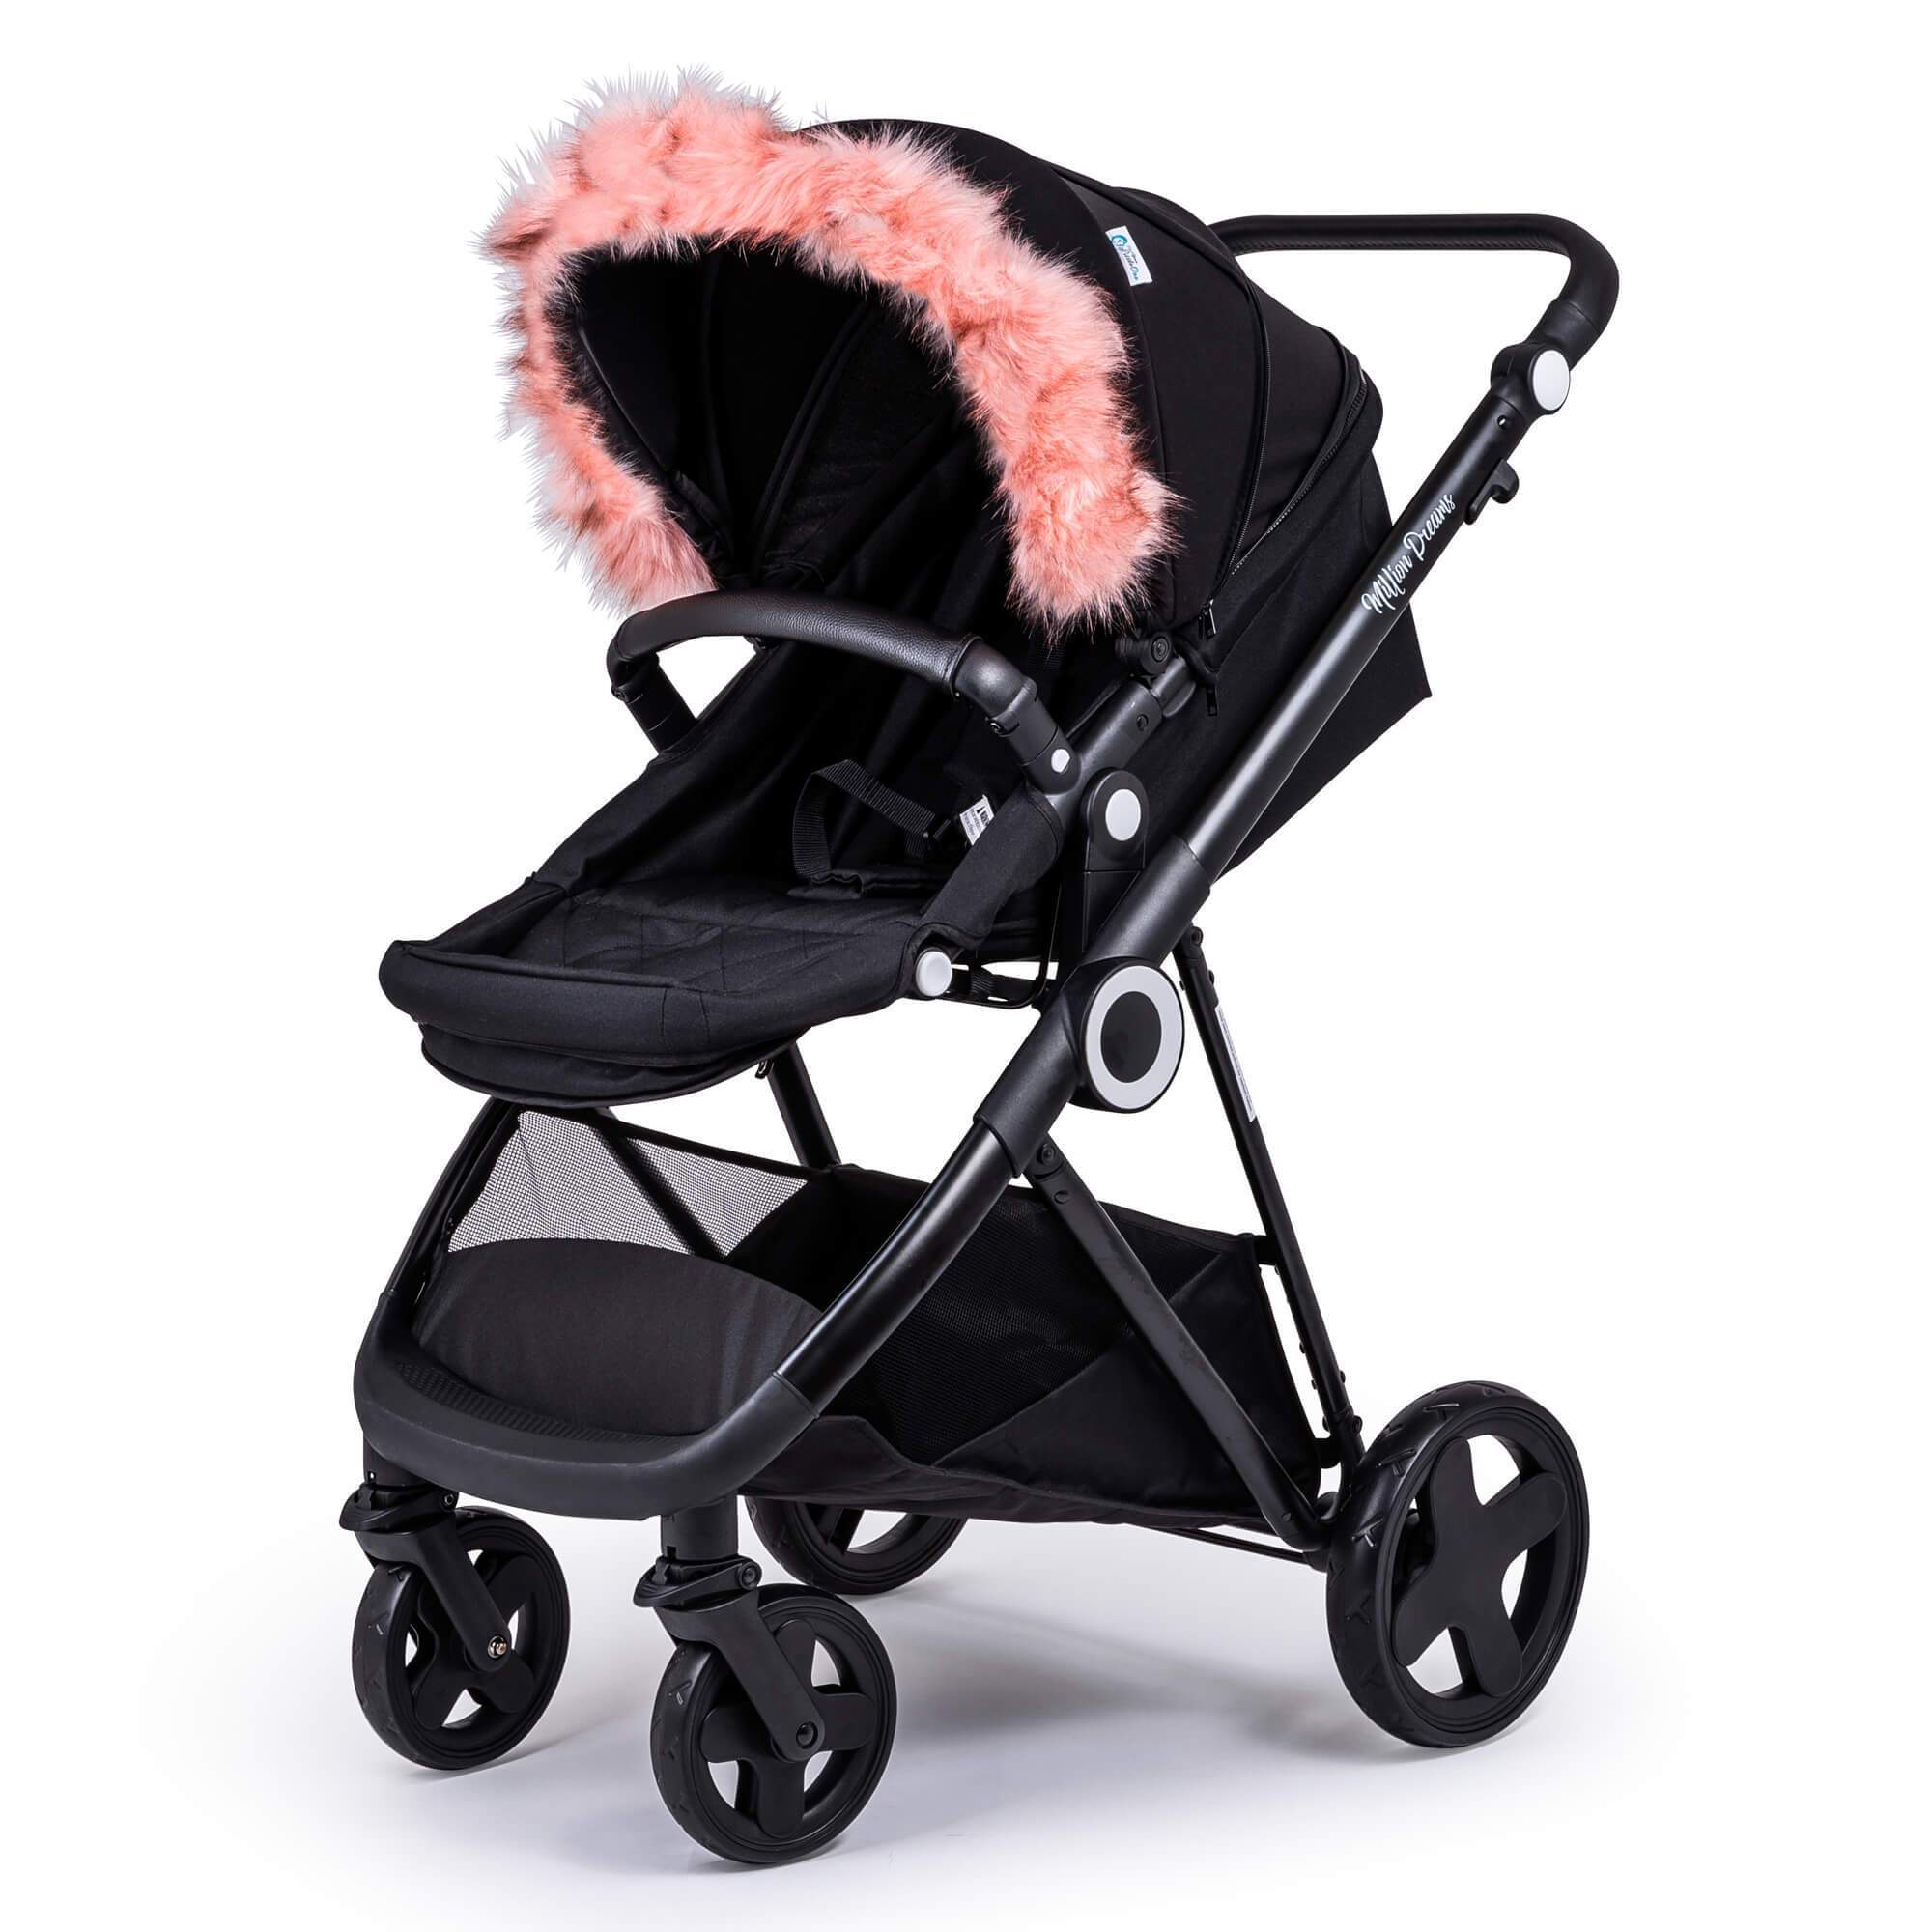 Pram Fur Hood Trim Attachment for Pushchair Compatible with Greentom - Pink / Fits All Models | For Your Little One